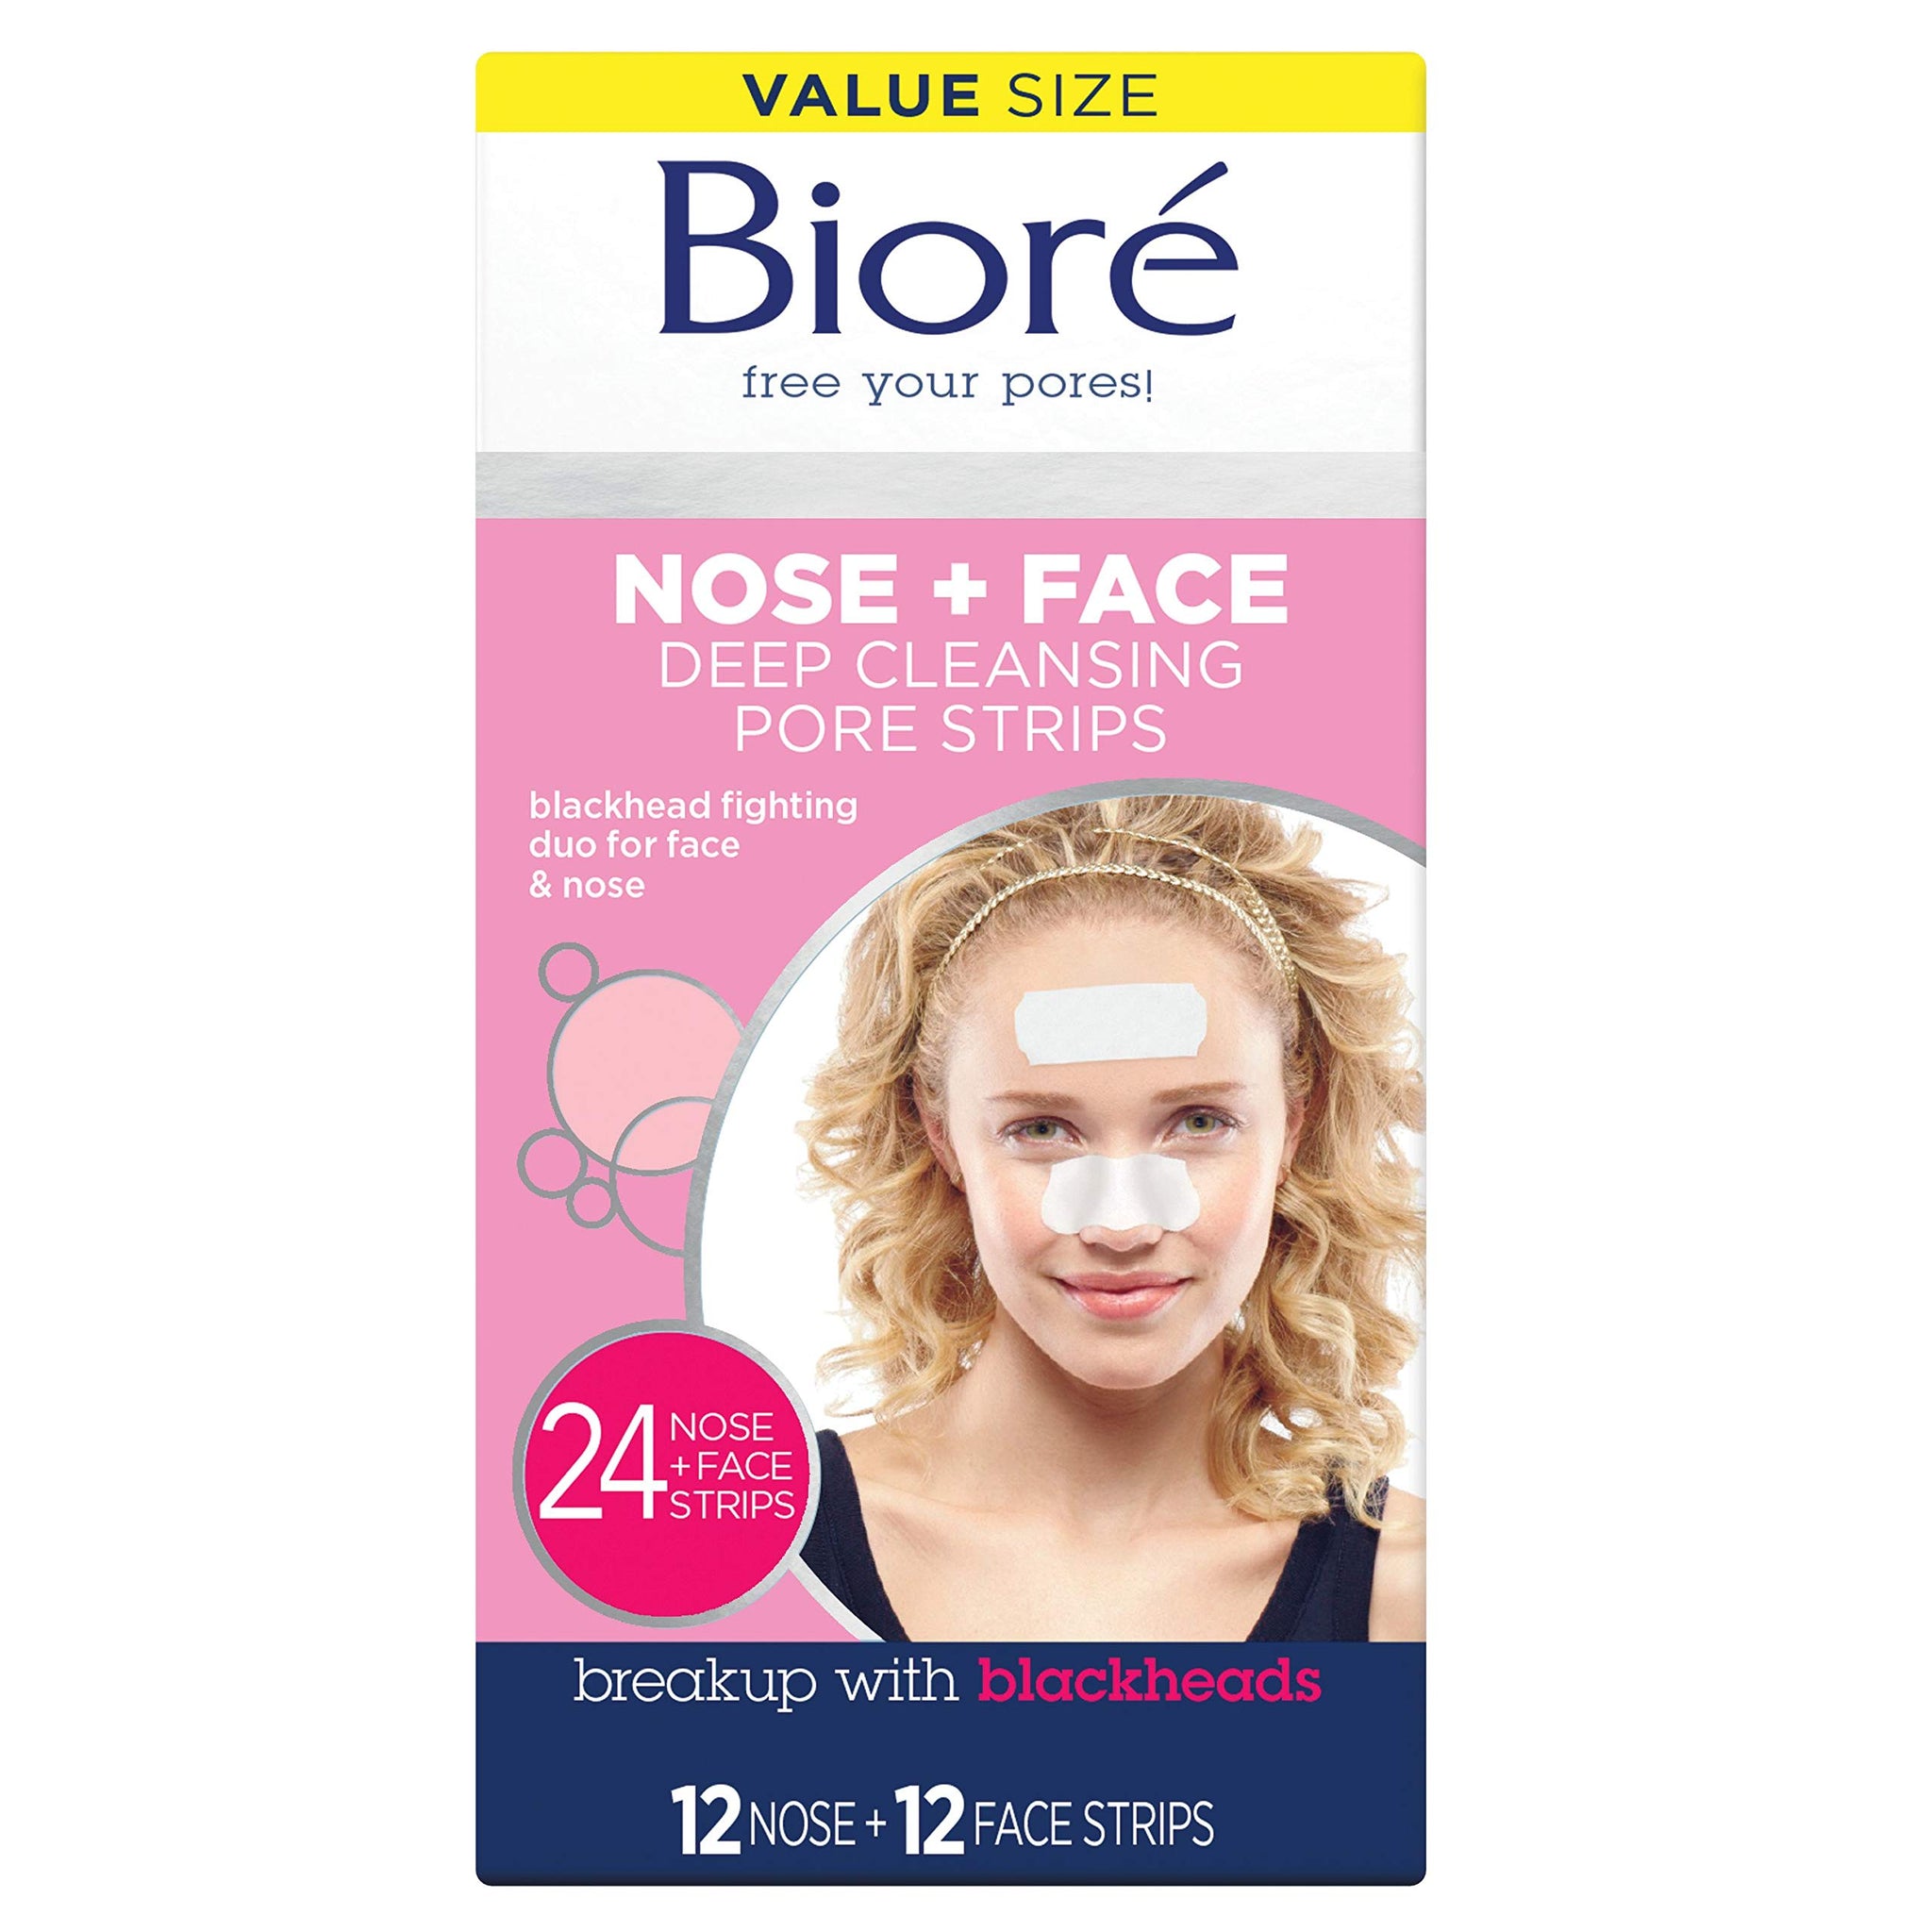 Bioré Blackhead Removing and Pore Unclogging Deep Cleansing Pore Strip for Nose, Chin, and Forehead (24 Count) (Packaging May Vary)